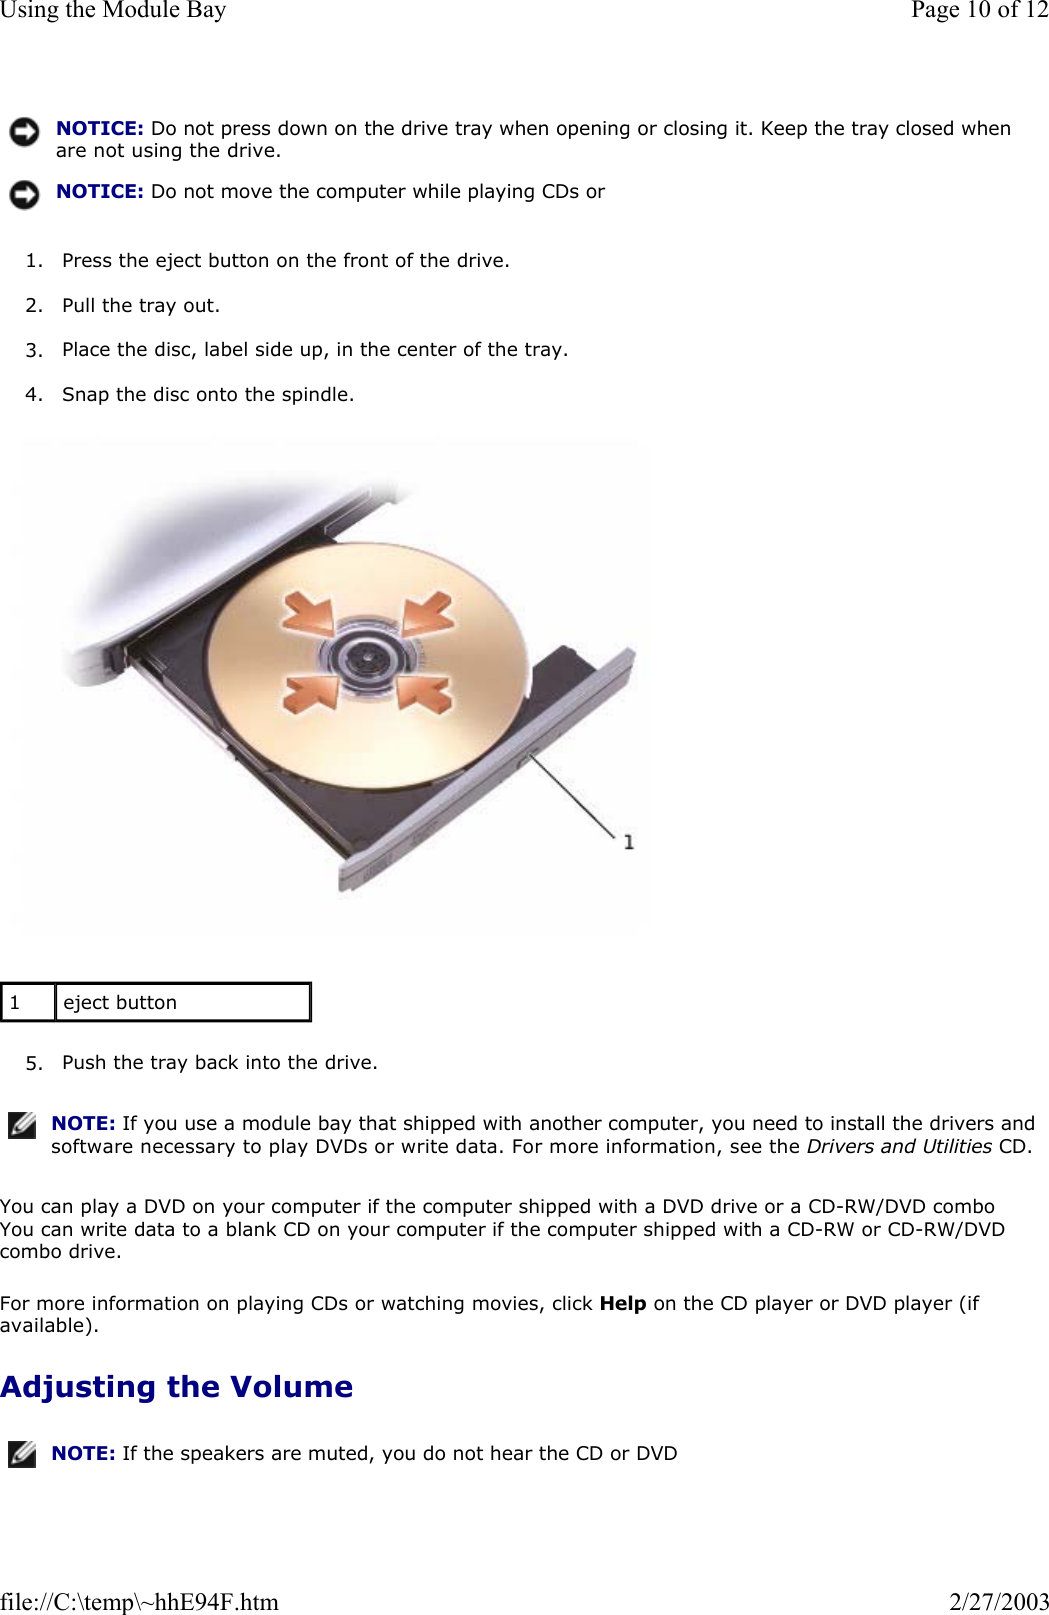 1. Press the eject button on the front of the drive.  2. Pull the tray out.  3. Place the disc, label side up, in the center of the tray.  4. Snap the disc onto the spindle.    5. Push the tray back into the drive.  You can play a DVD on your computer if the computer shipped with a DVD drive or a CD-RW/DVD combo You can write data to a blank CD on your computer if the computer shipped with a CD-RW or CD-RW/DVD combo drive. For more information on playing CDs or watching movies, click Help on the CD player or DVD player (if available). Adjusting the Volume NOTICE: Do not press down on the drive tray when opening or closing it. Keep the tray closed when are not using the drive.NOTICE: Do not move the computer while playing CDs or 1  eject button NOTE: If you use a module bay that shipped with another computer, you need to install the drivers and software necessary to play DVDs or write data. For more information, see the Drivers and Utilities CD.NOTE: If the speakers are muted, you do not hear the CD or DVD Page 10 of 12Using the Module Bay2/27/2003file://C:\temp\~hhE94F.htm